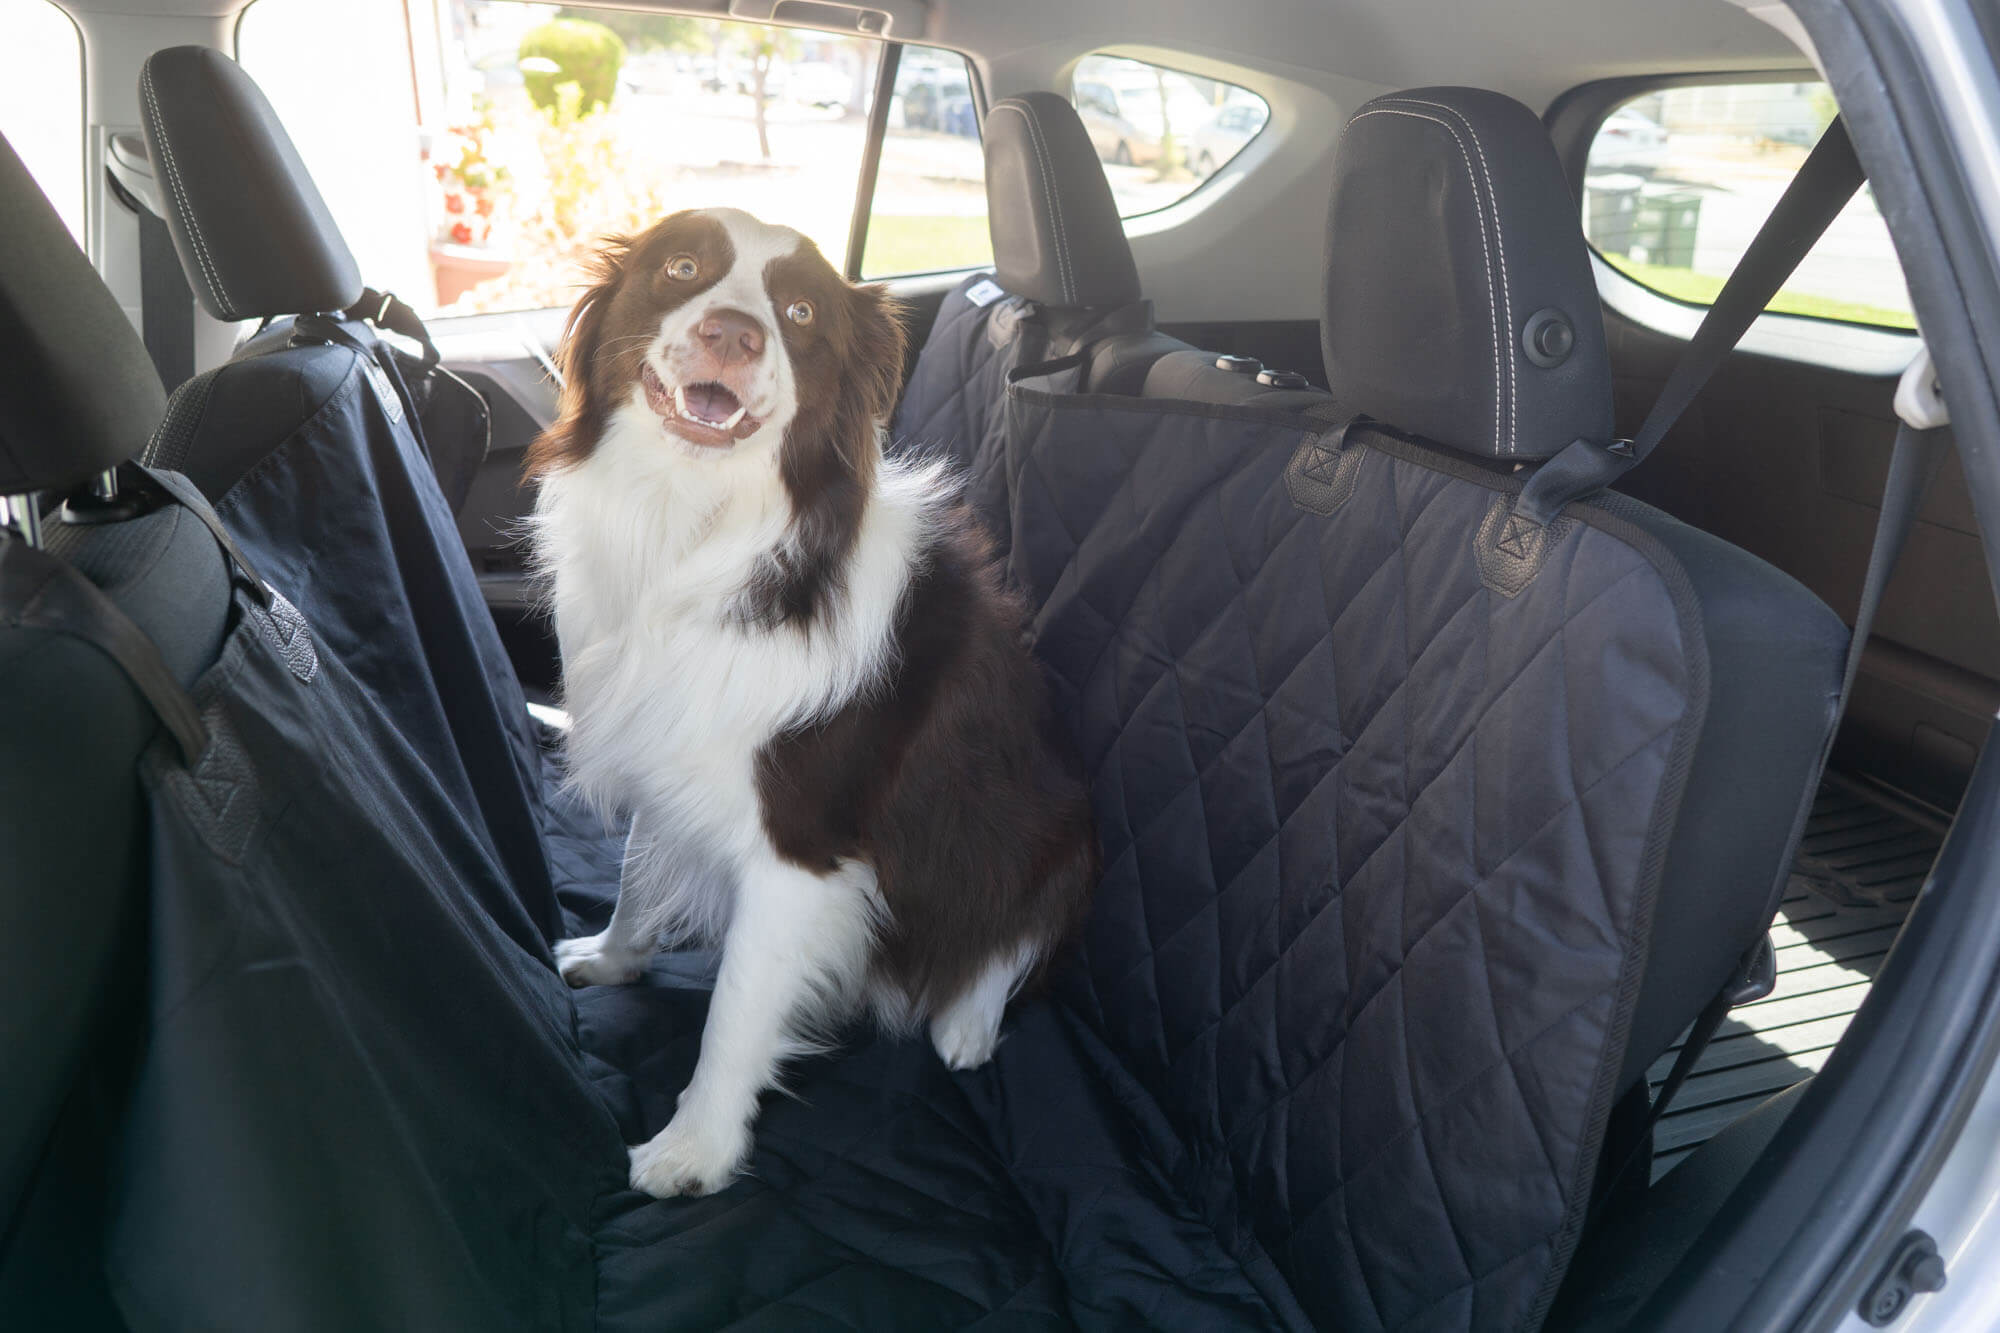 The 9 Best Back Seat Covers For Dogs - Reviews by Your Best Digs